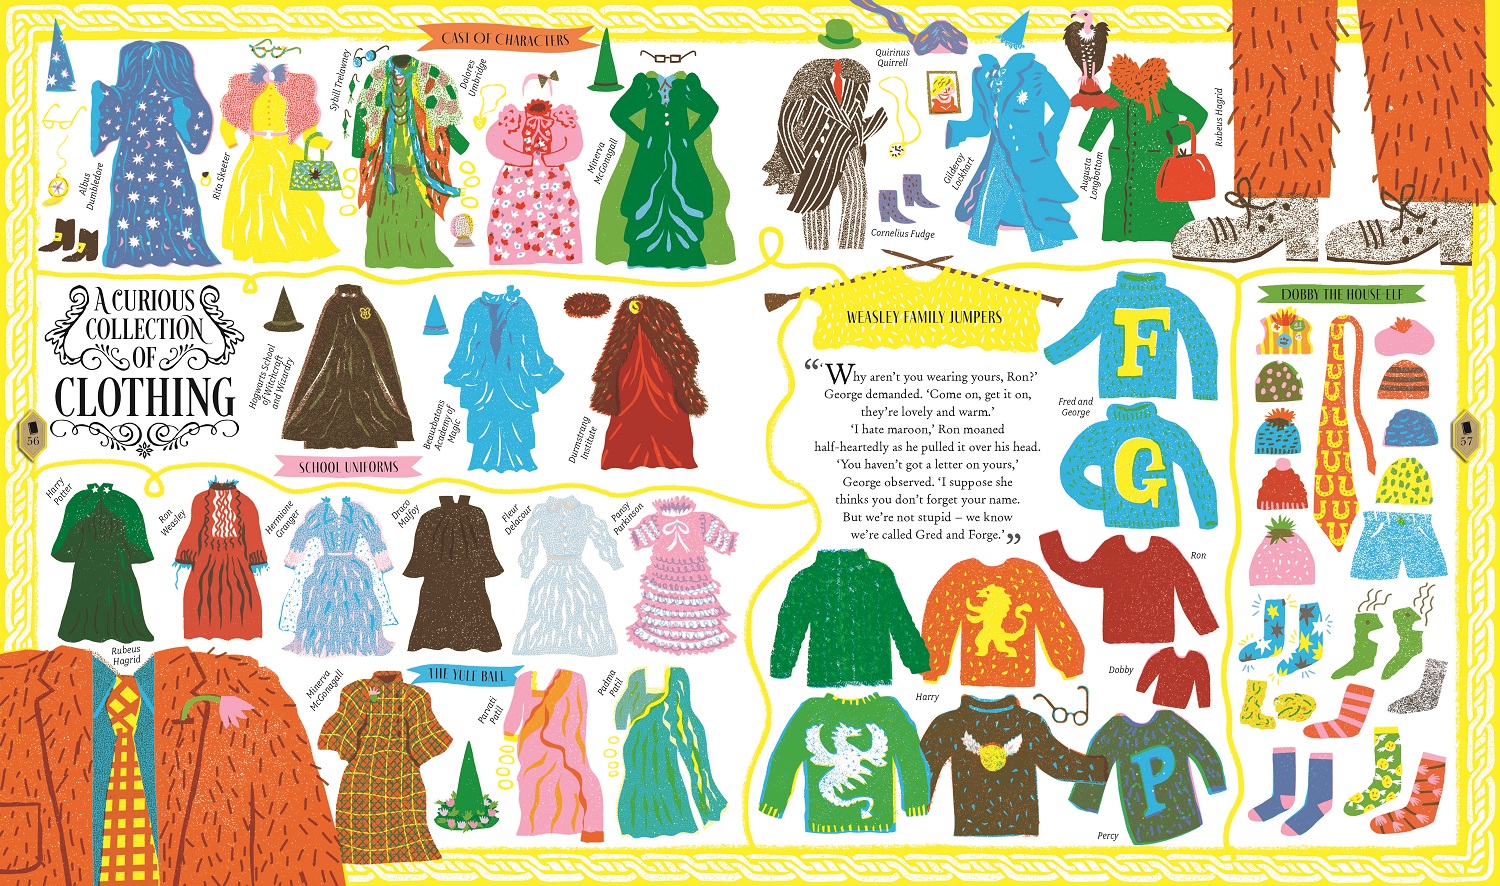 The Harry Potter Wizarding Almanac spread showing various characters' outfits